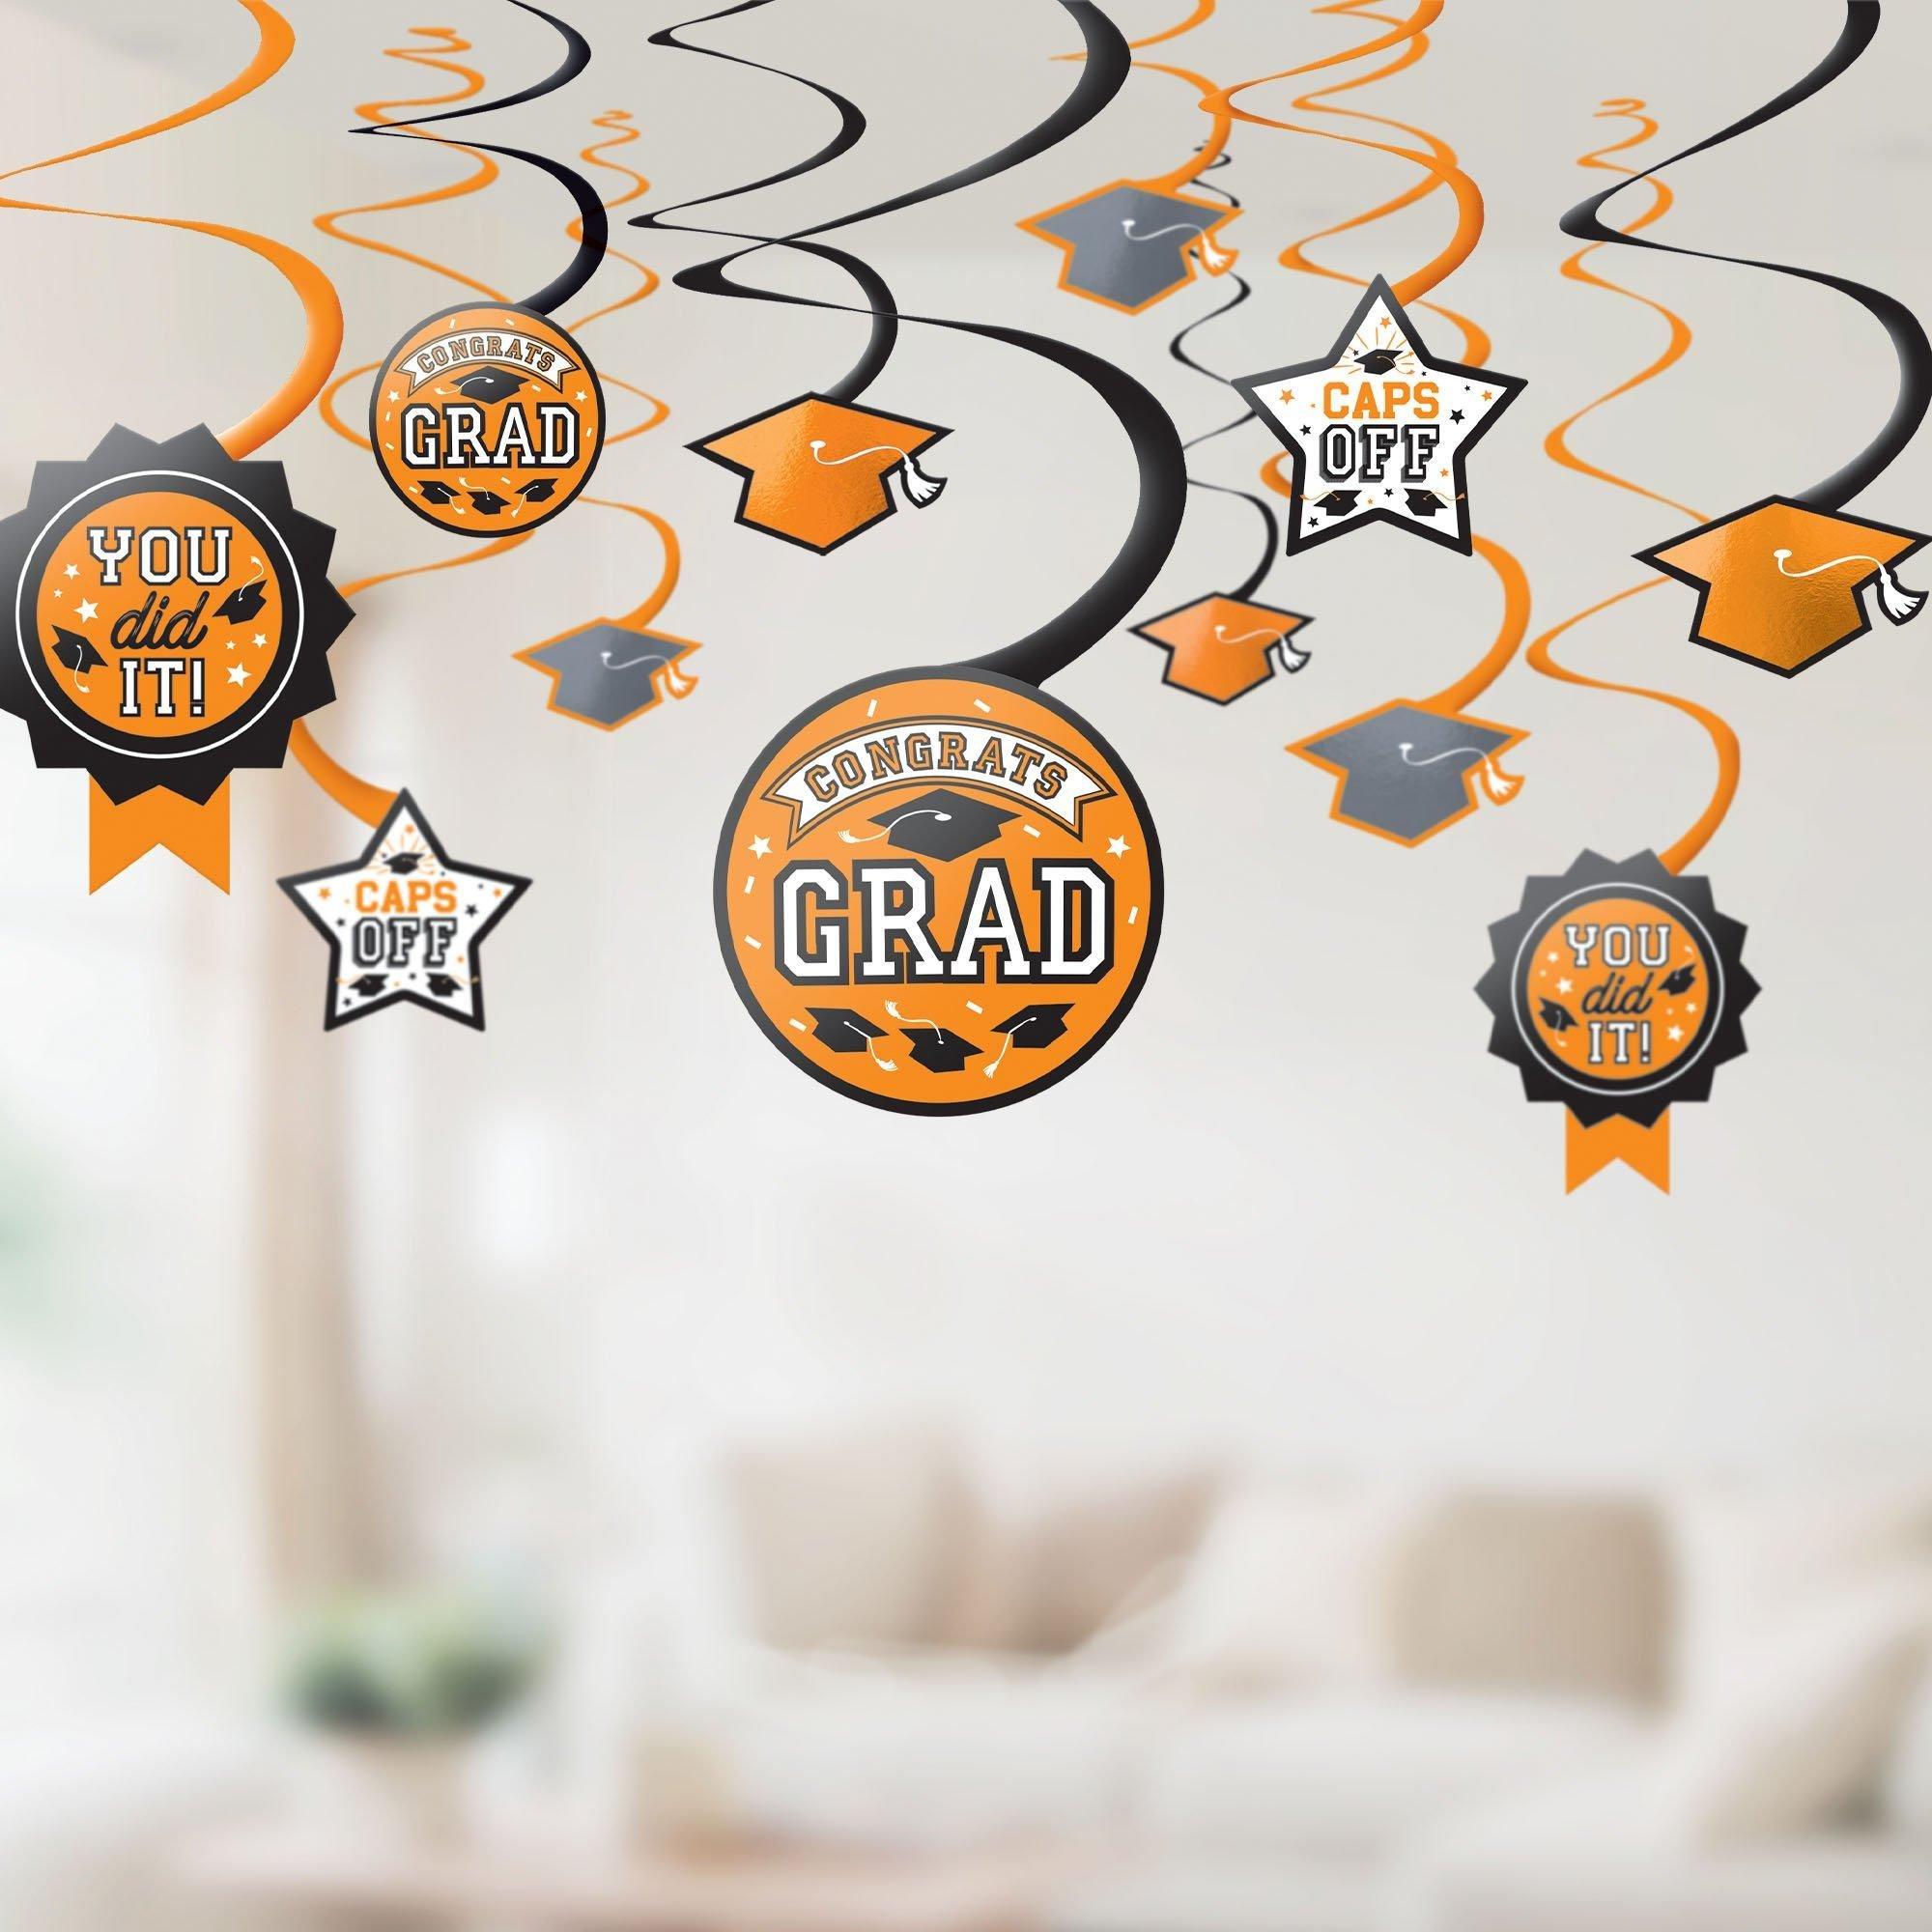 Graduation Party Supplies Kit for 60 with Decorations, Banners, Plates, Napkins, Cups - Orange Congrats Grad